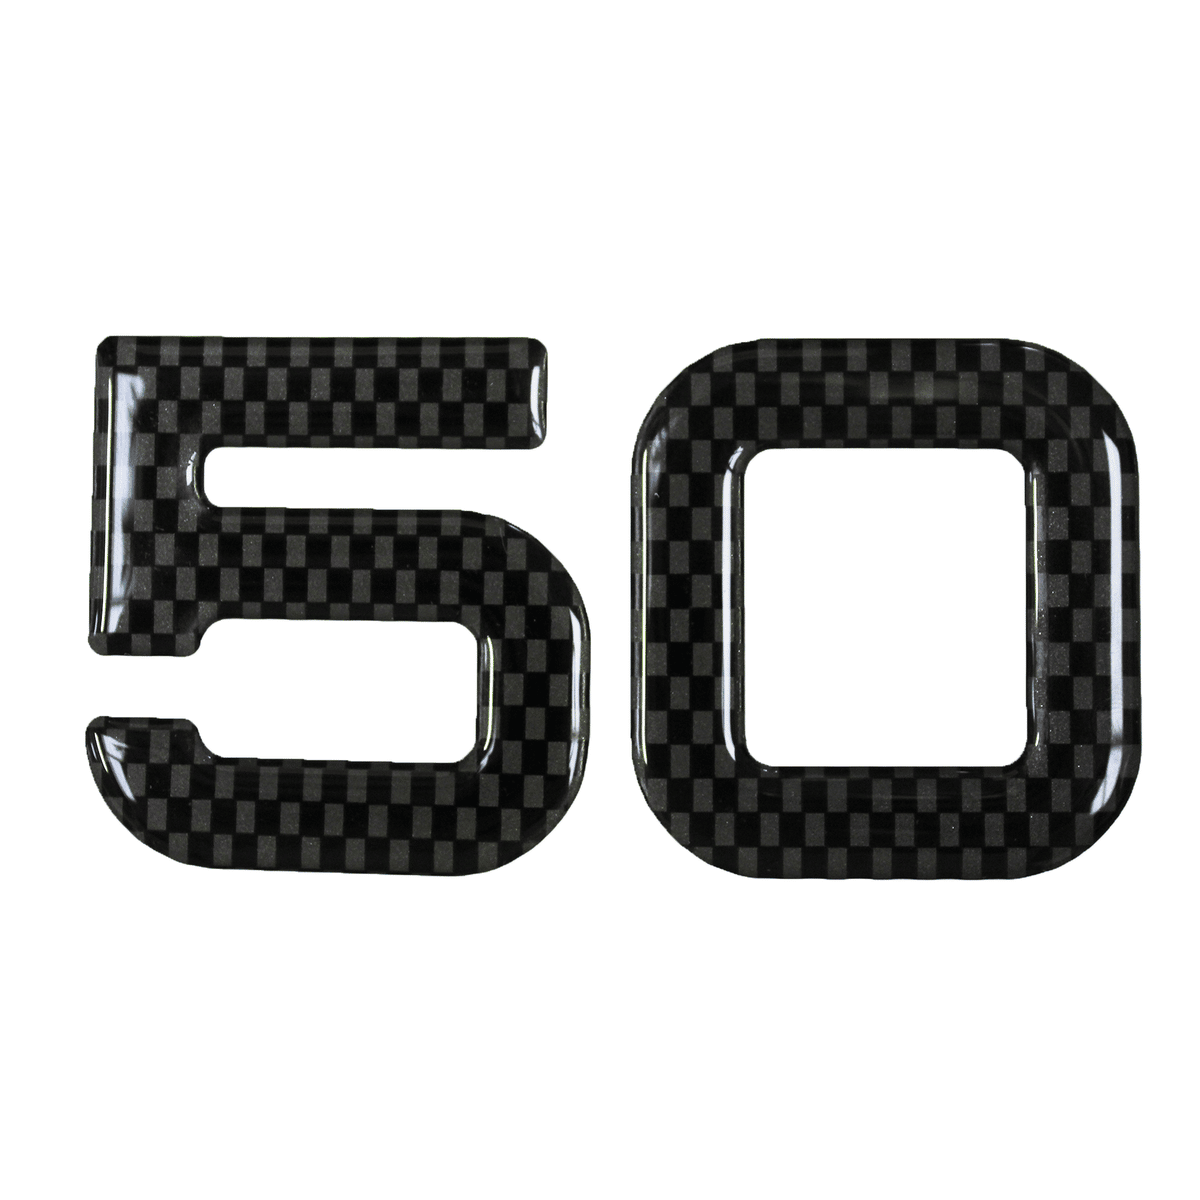 50 Graphite Carbon Style 3d gel Number Plate Digits